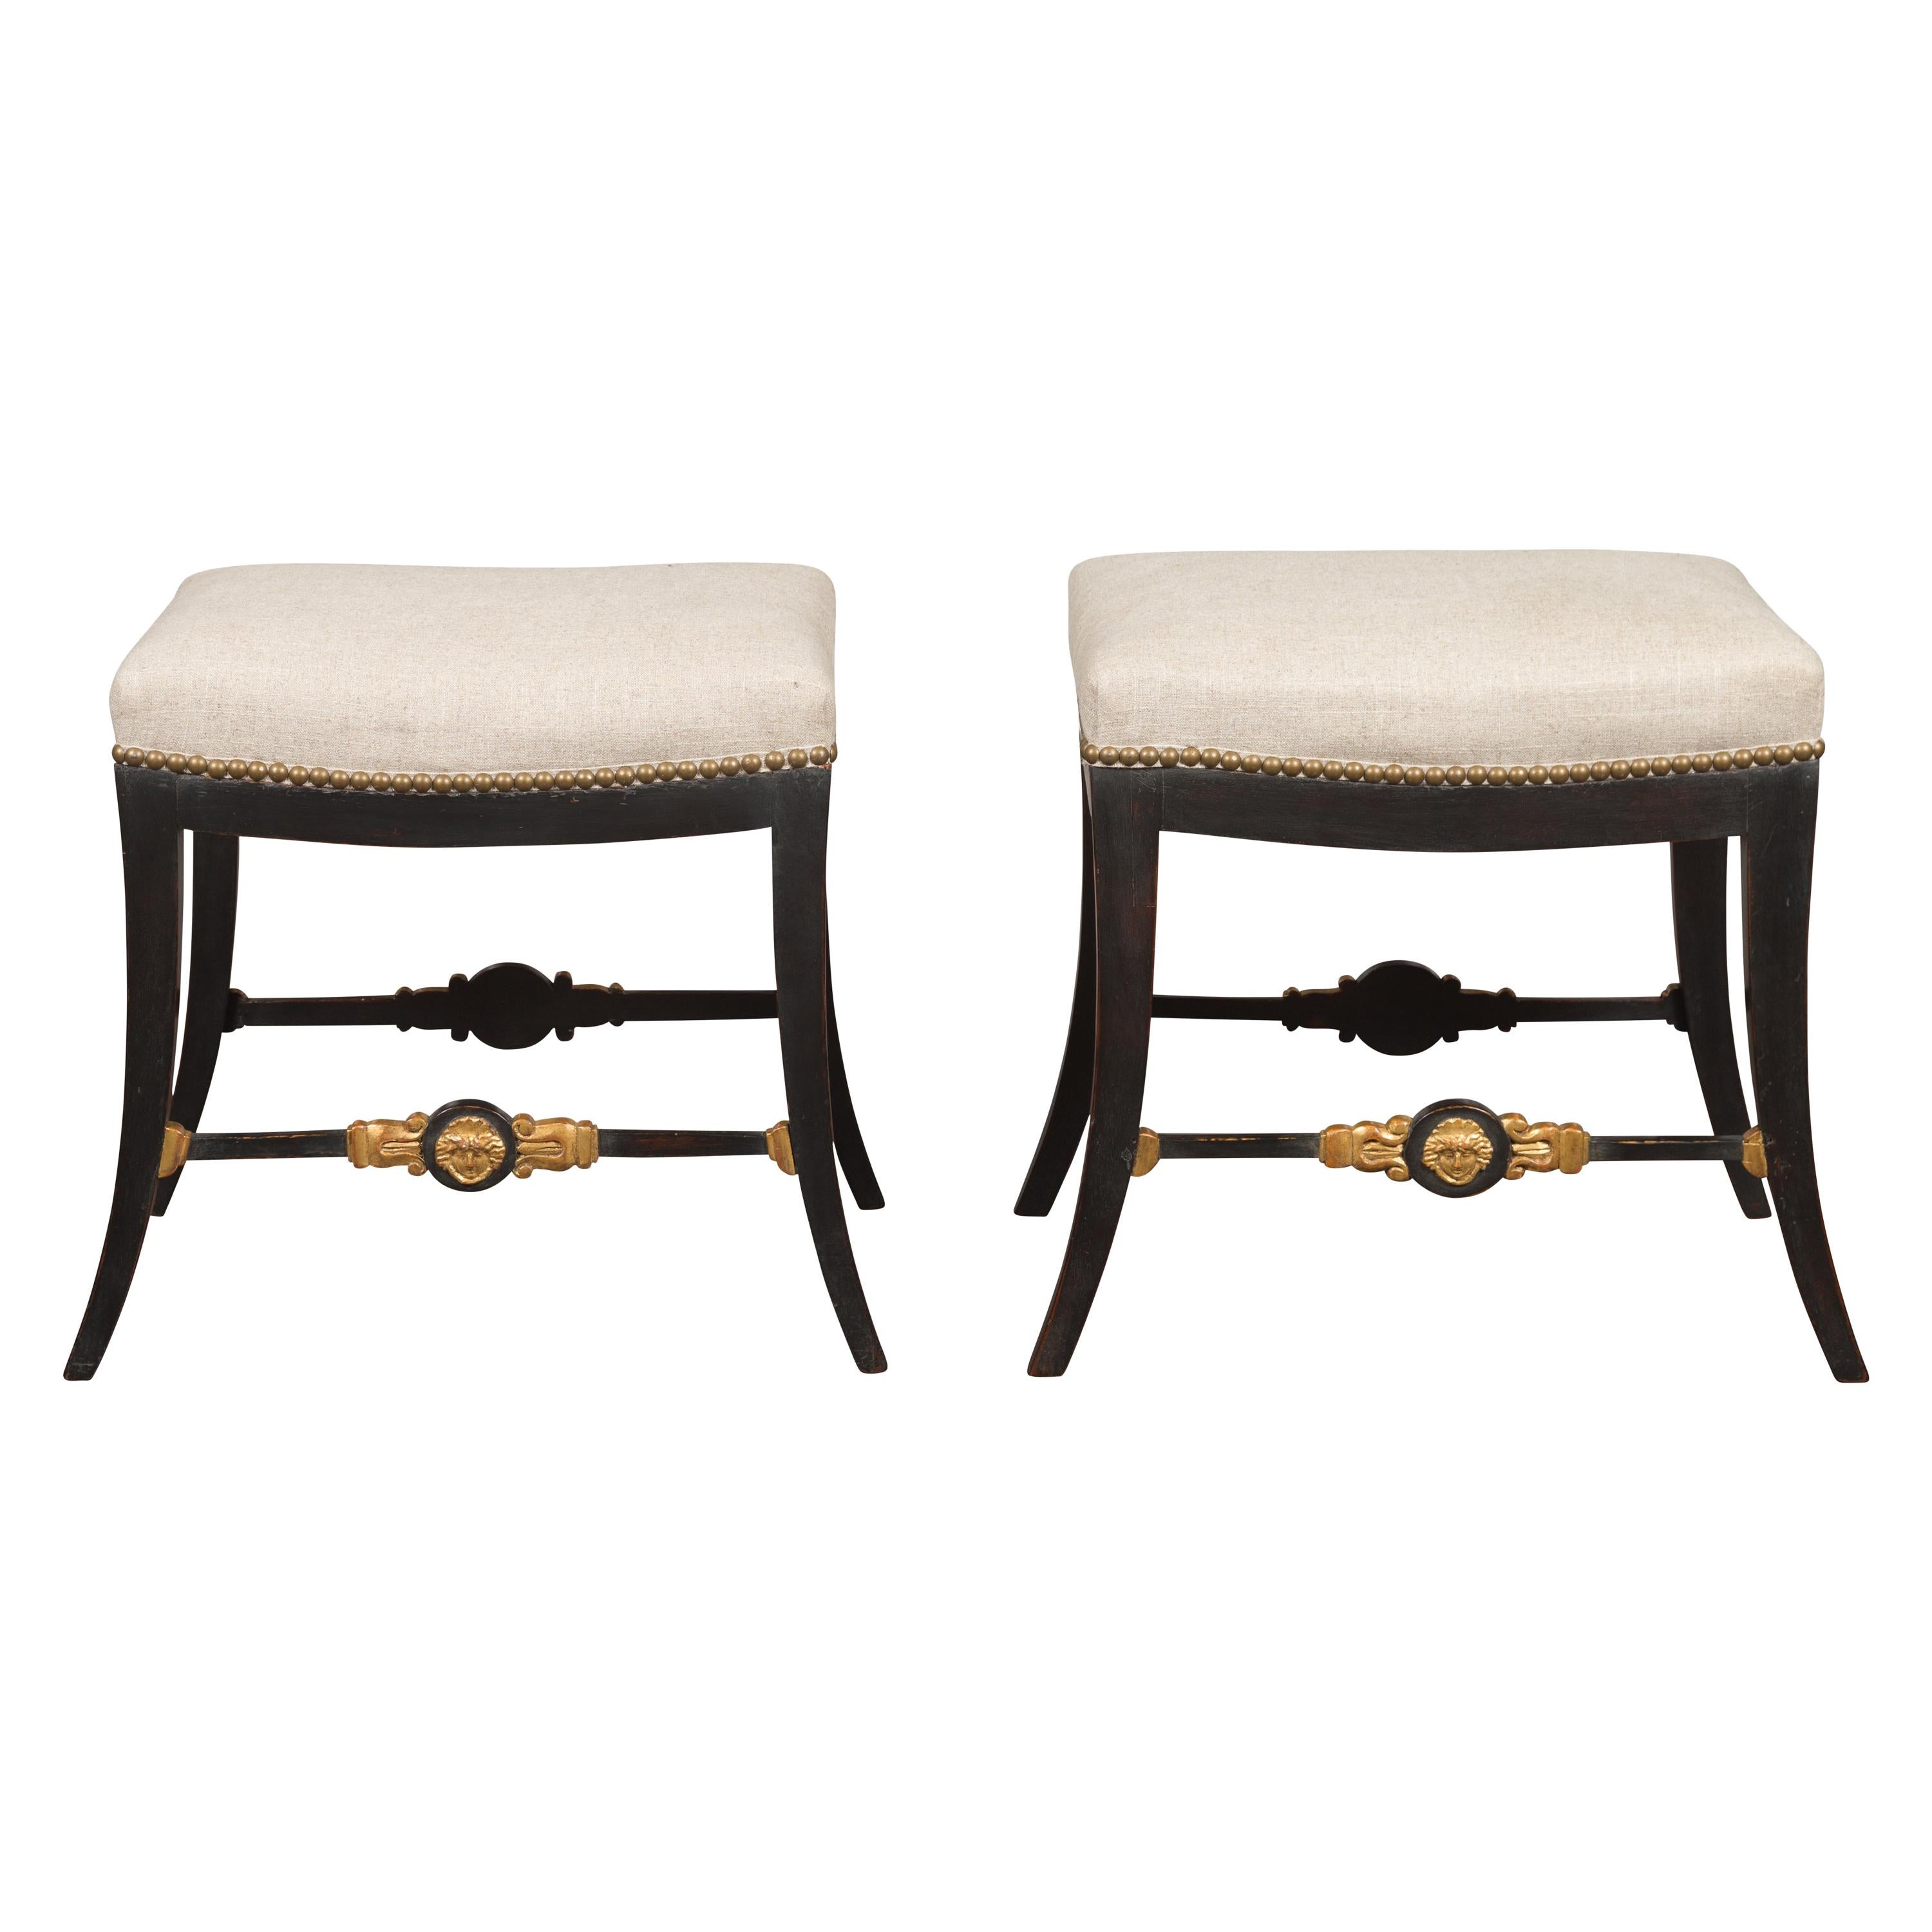 Pair of English Regency 1820s Ebonized and Gilt Stools with New Upholstery For Sale